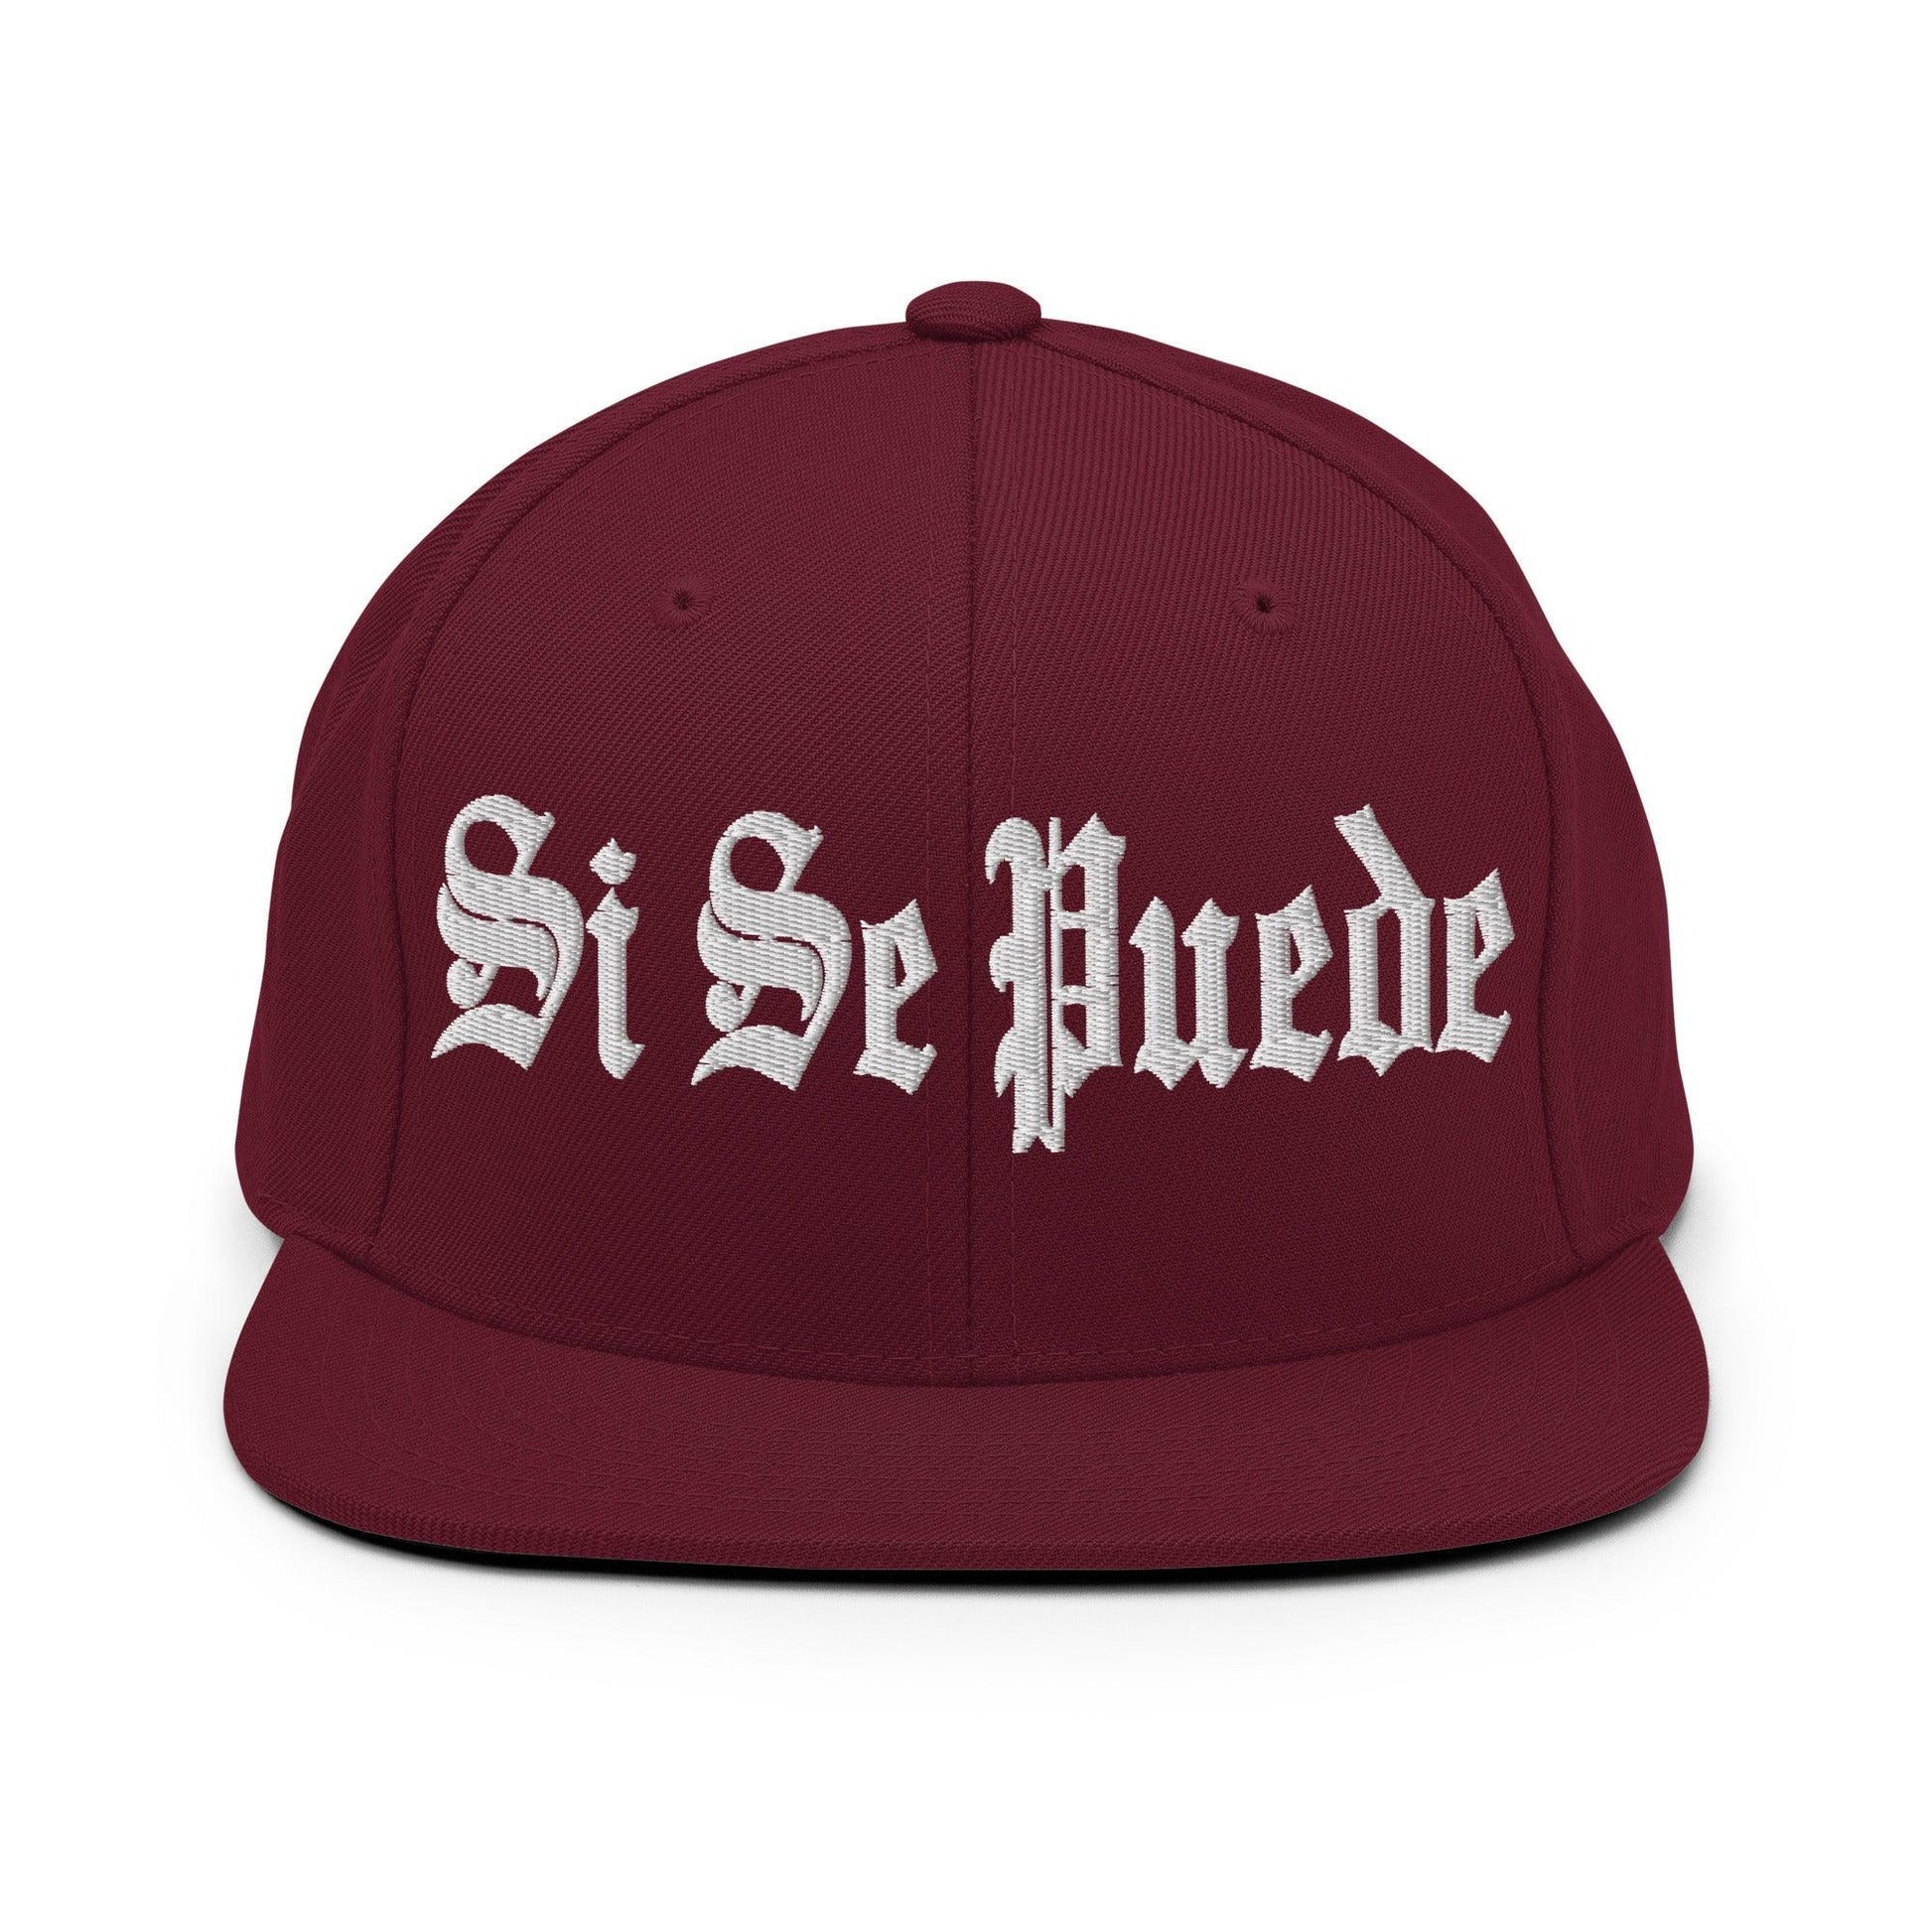 Si Se Puede Old English Snapback Hat Maroon